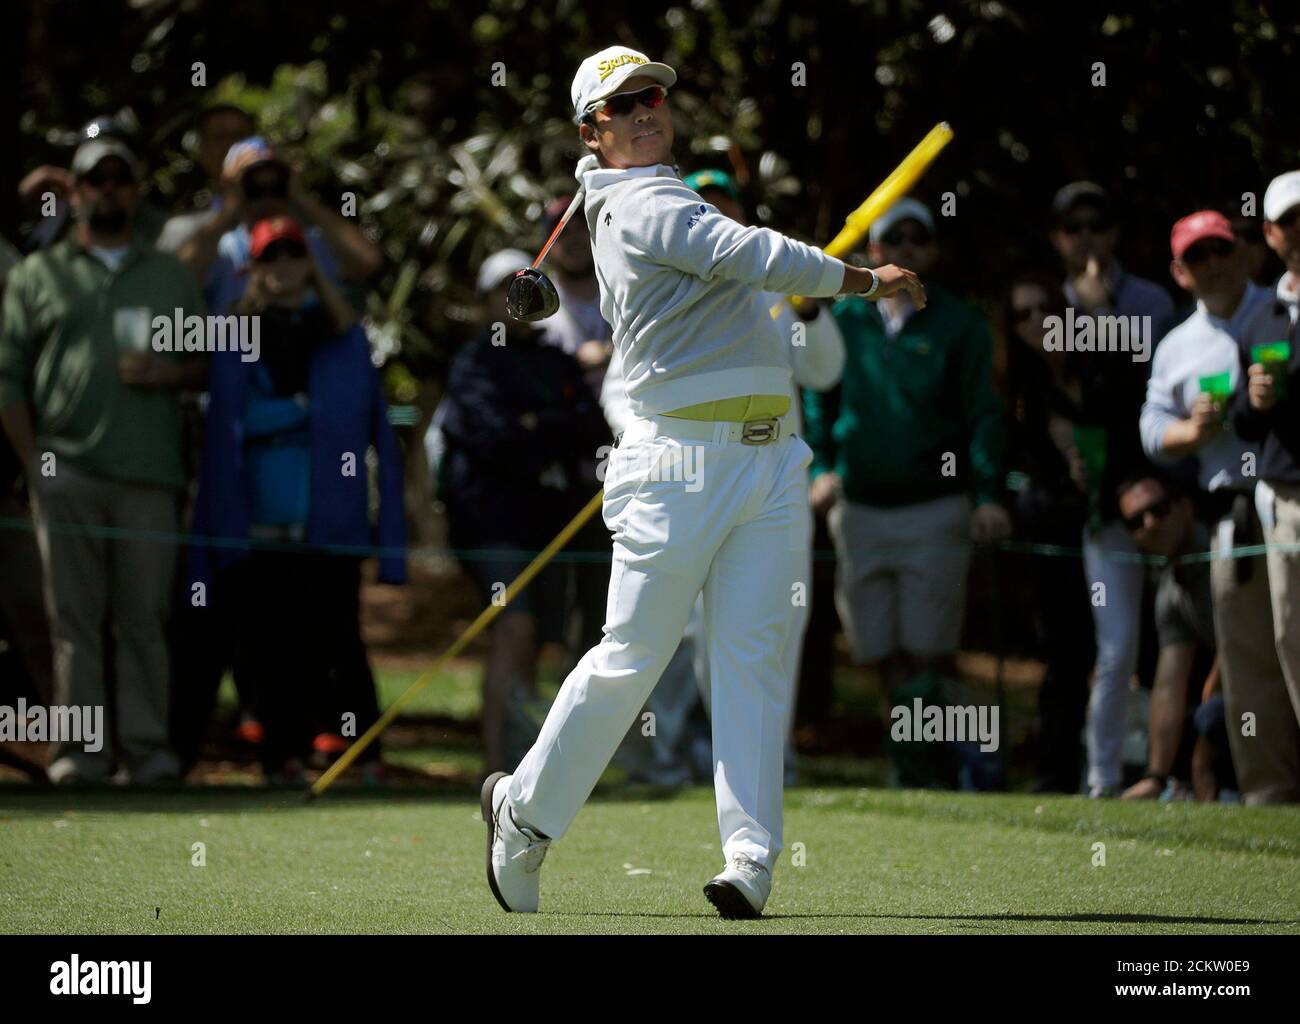 Hideki Matsuyama of Japan hits off the seventh tee in second round play during the 2017 Masters golf tournament at Augusta National Golf Club in Augusta, Georgia, U.S., April 7, 2017. REUTERS/Mike Segar Foto Stock